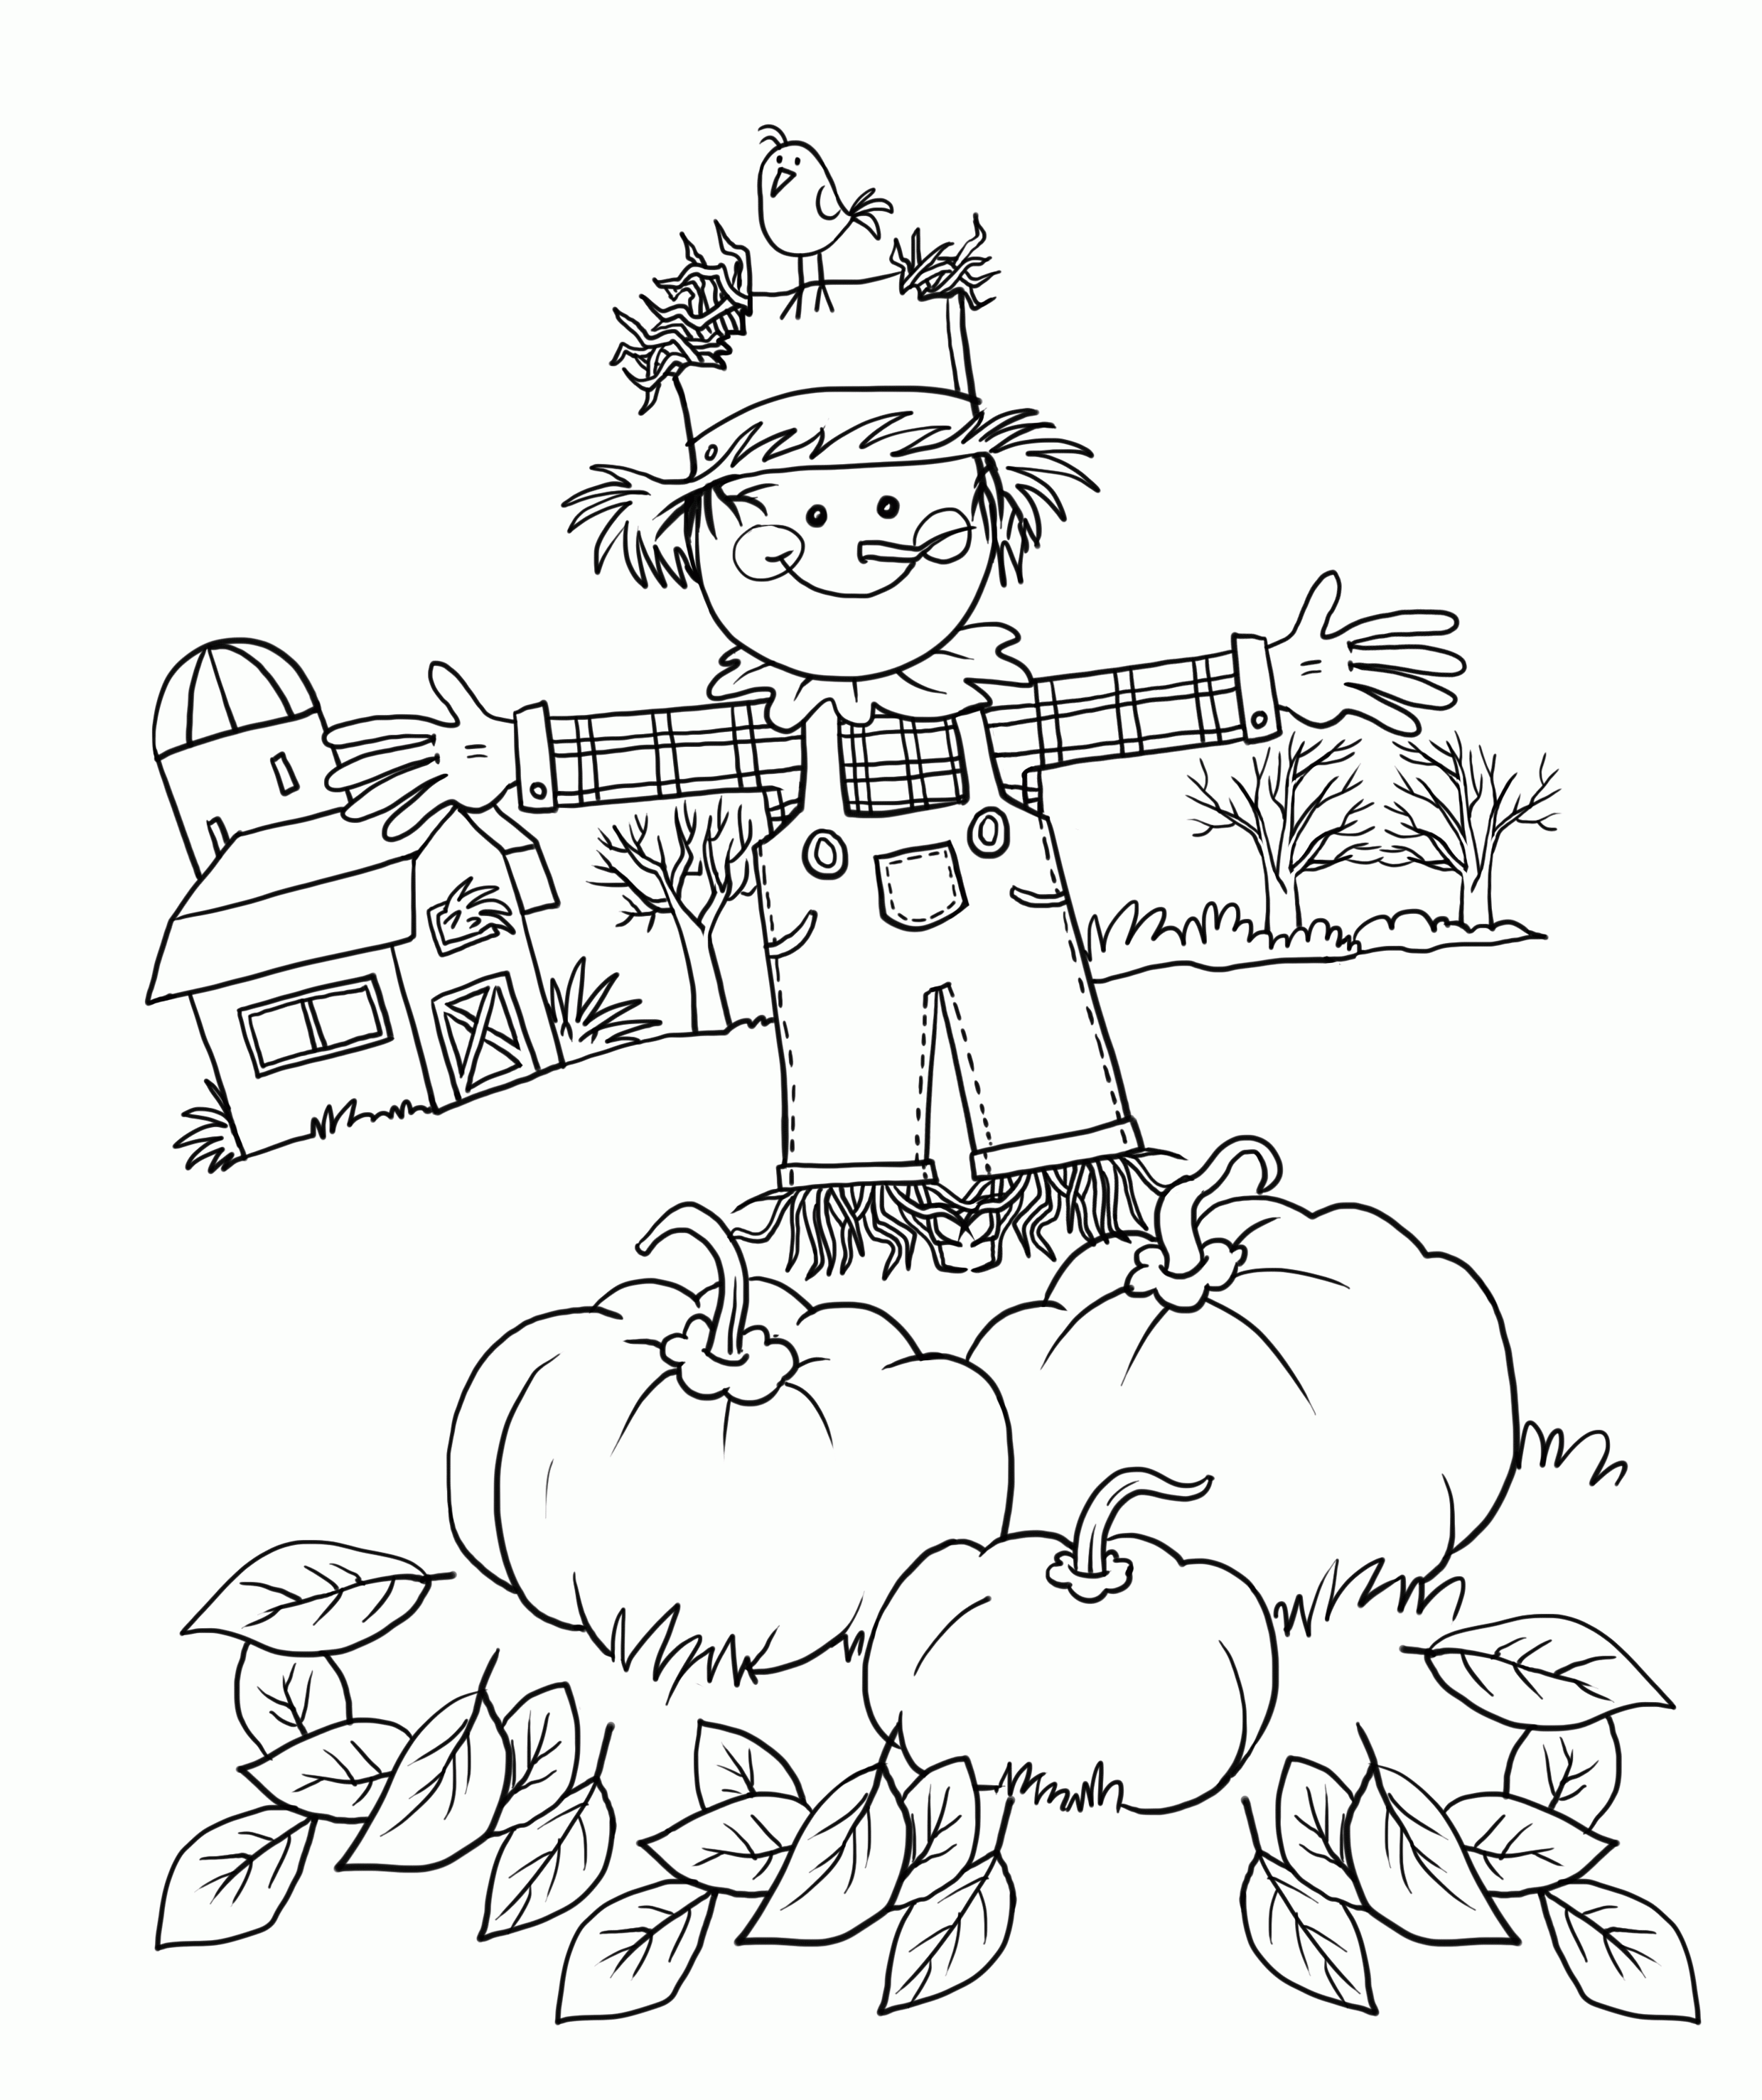 21 Free Pictures for: Scarecrow Coloring Pages. Temoon.us